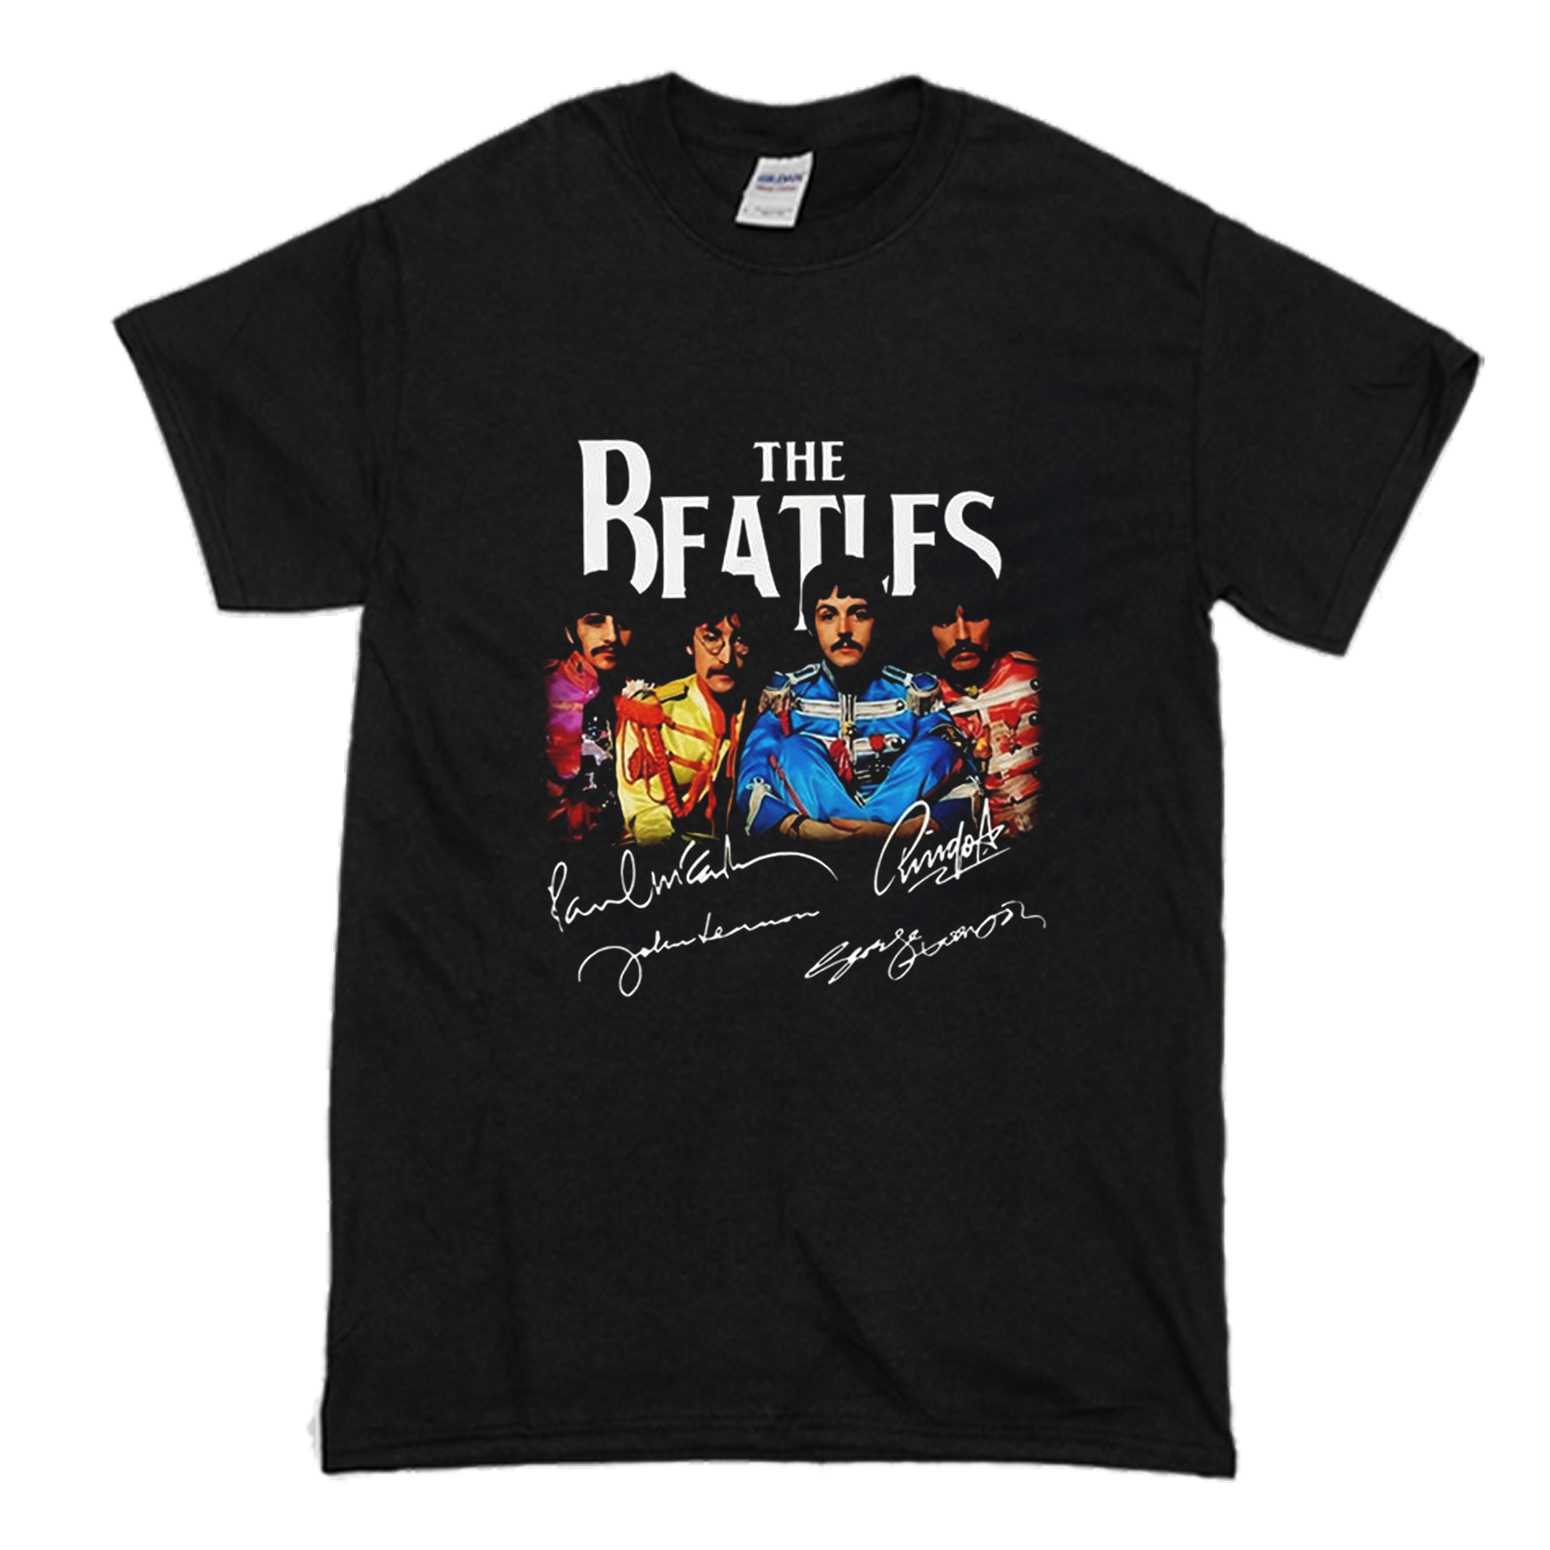 The Beatles Sgt Pepper’s Lonely Hearts Club Band T-Shirt (BSM)